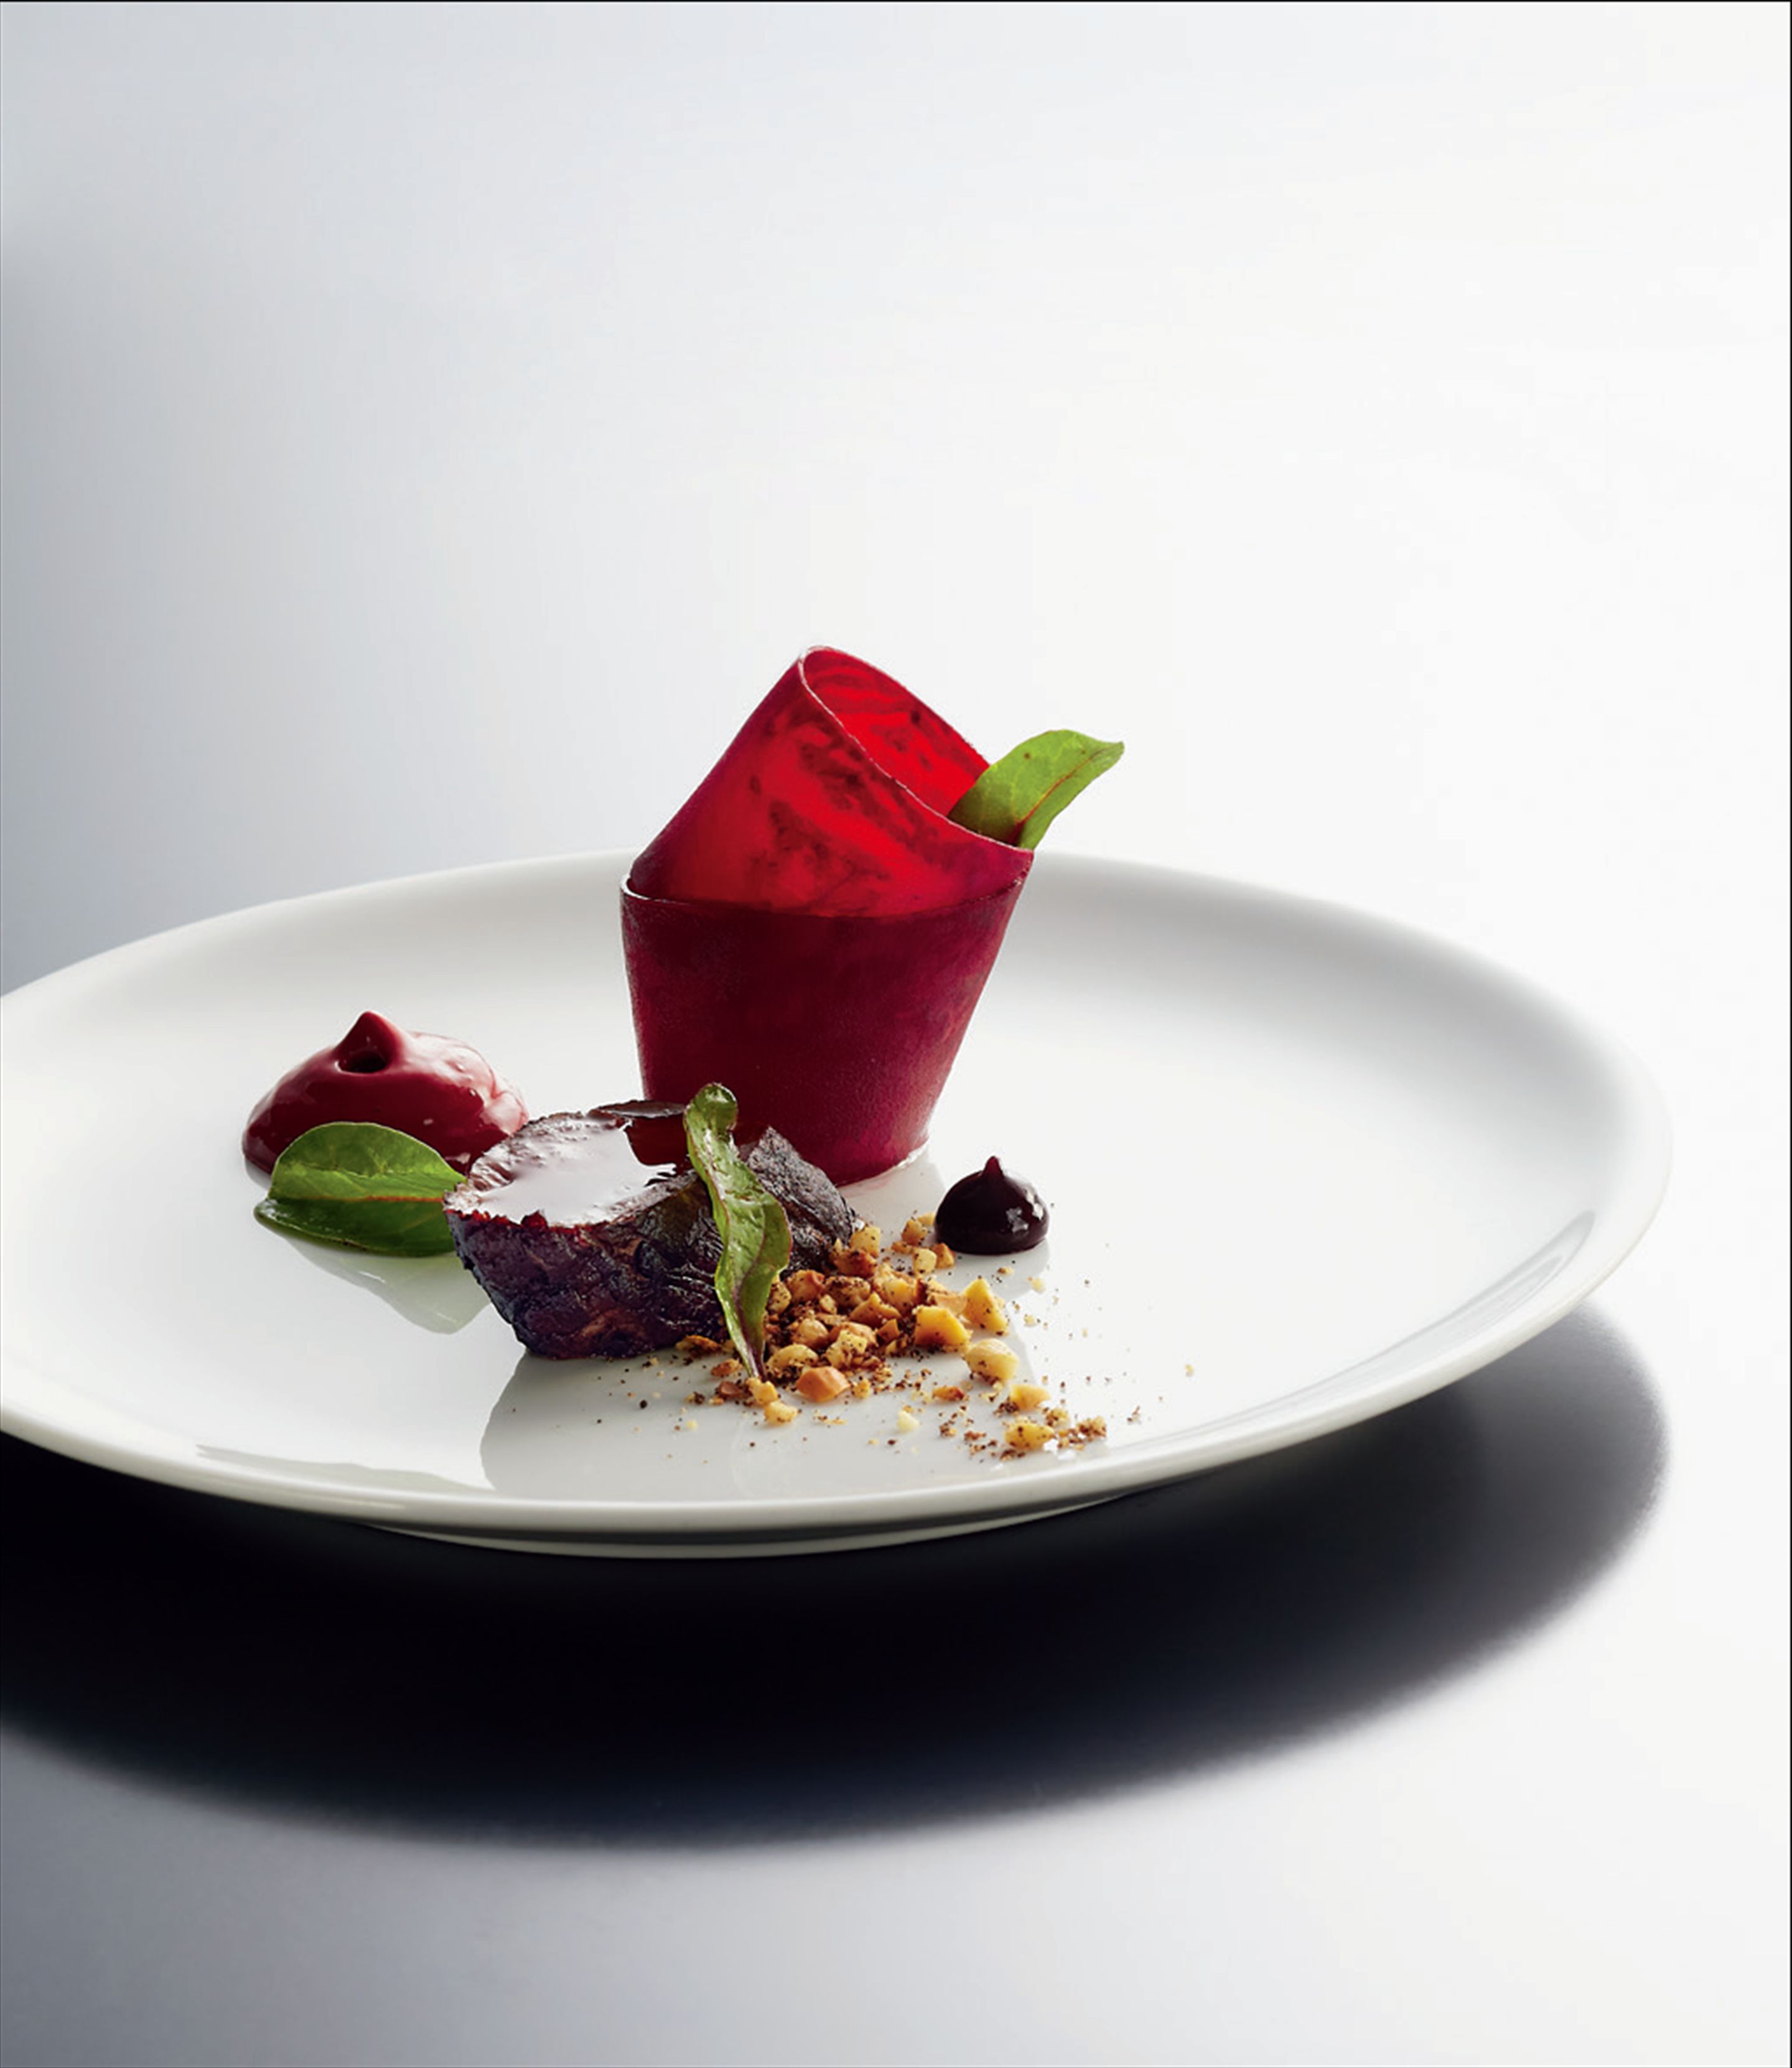 Venison tenderloin with beetroot and cocoa, and peanut and vanilla crumble